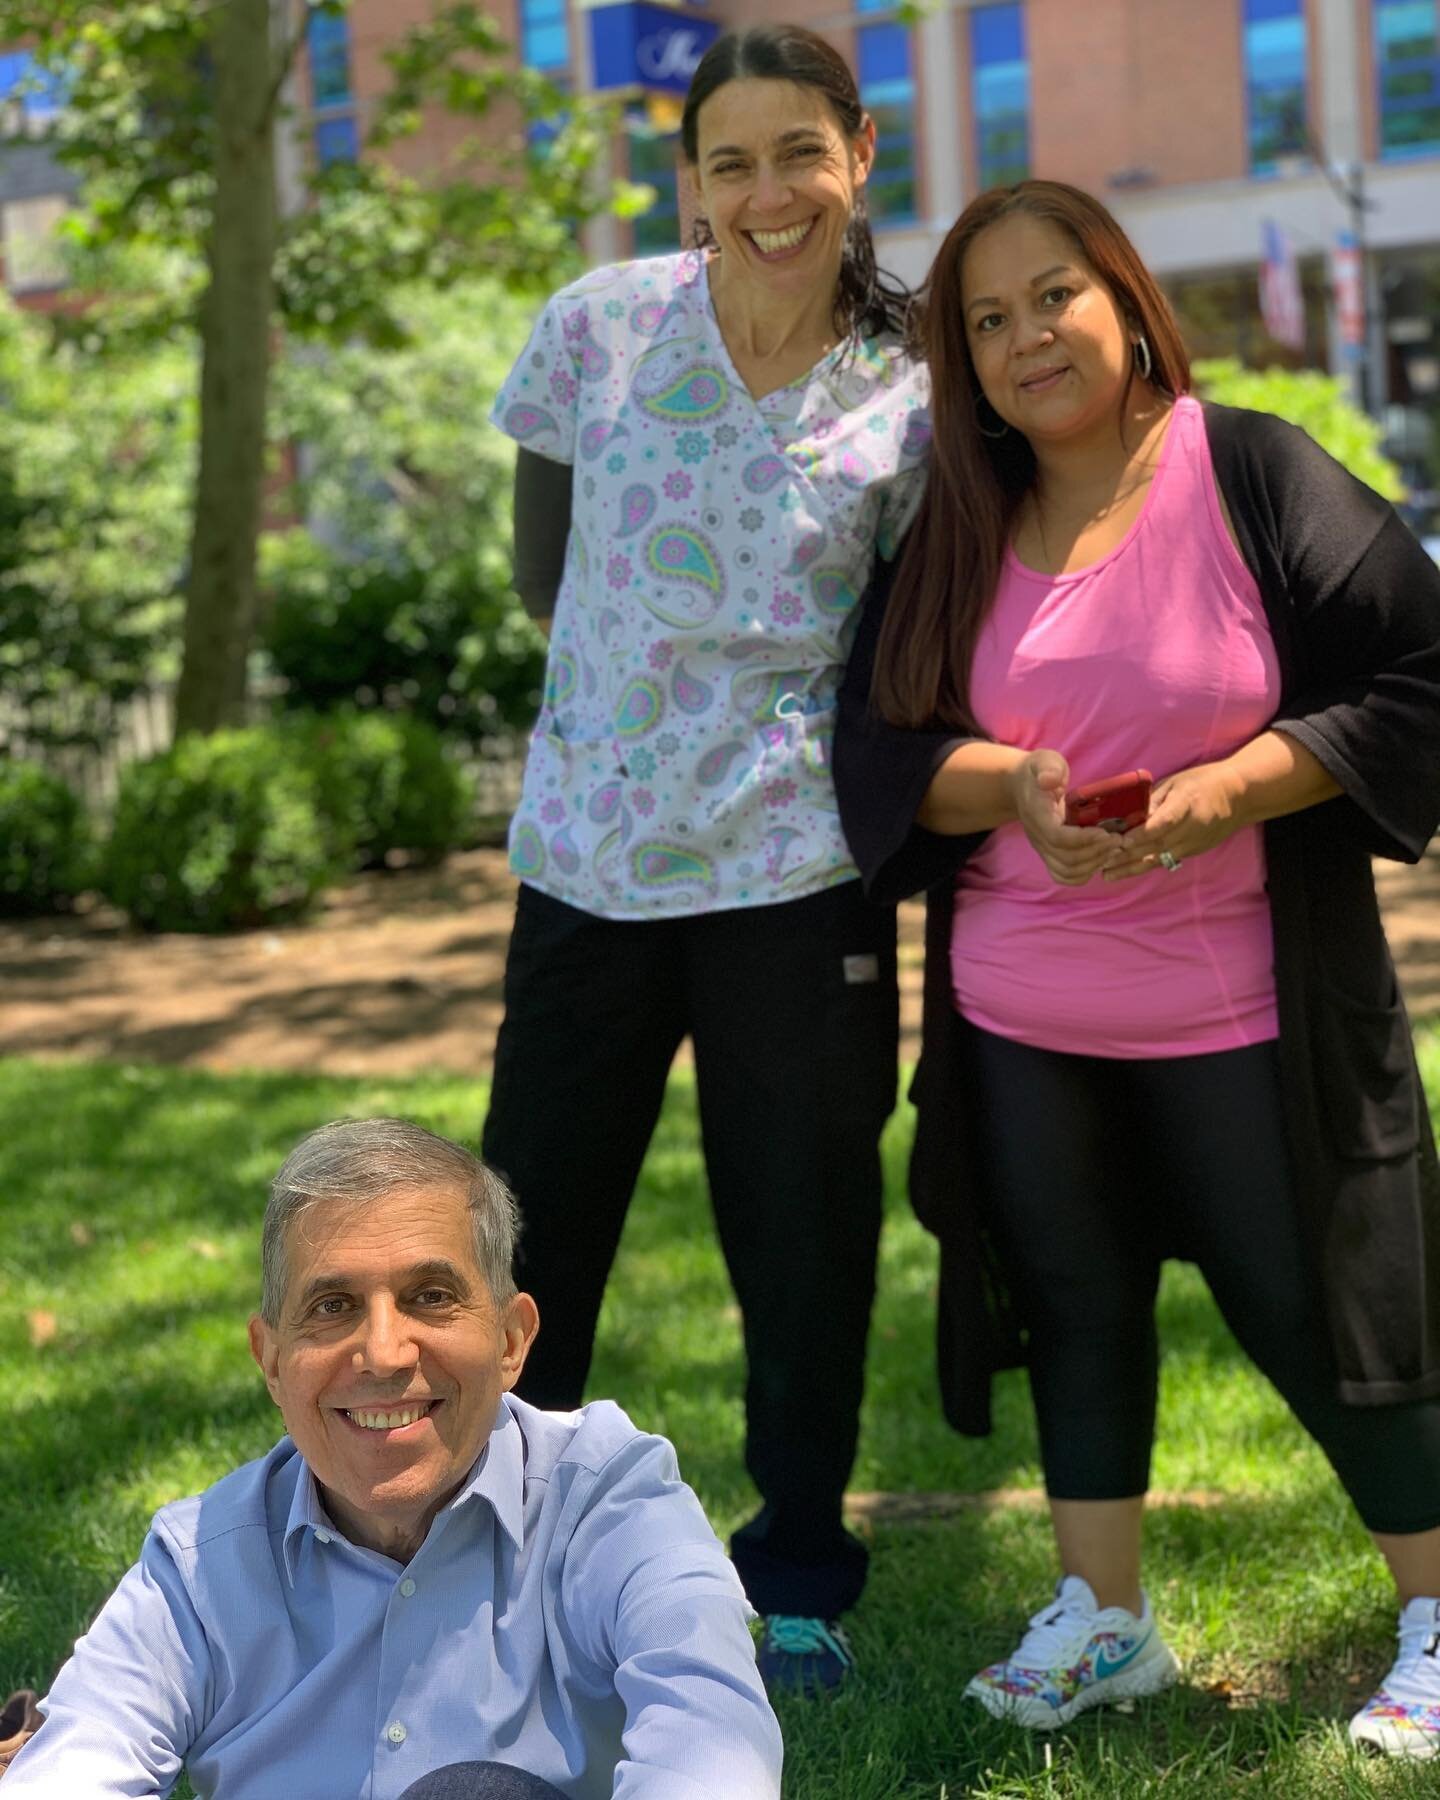 Work hard, play hard❗️ What better way to enjoy break time then having a picnic at Military Park here in Newark⁉️
🦷
The 50 Commerce Dental Staff had a great time enjoying the weather. Now back to work❗️🪥🥼
#lunchbreak #dentaloffice #newark #militar